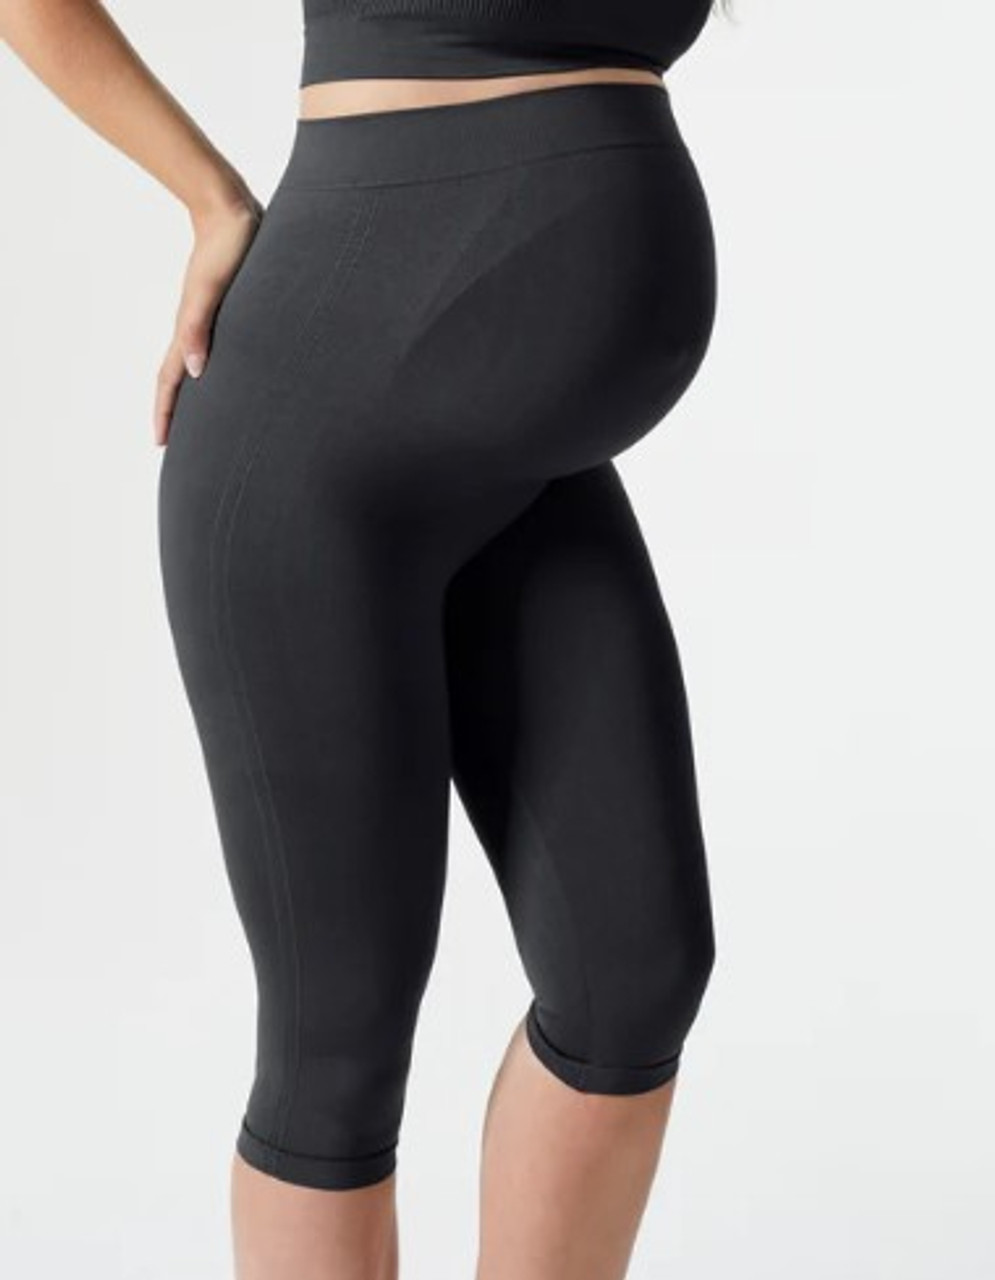  BLANQI Maternity Leggings, Over The Belly Pregnancy Tights,  Moderate Support (Small) Black : Clothing, Shoes & Jewelry